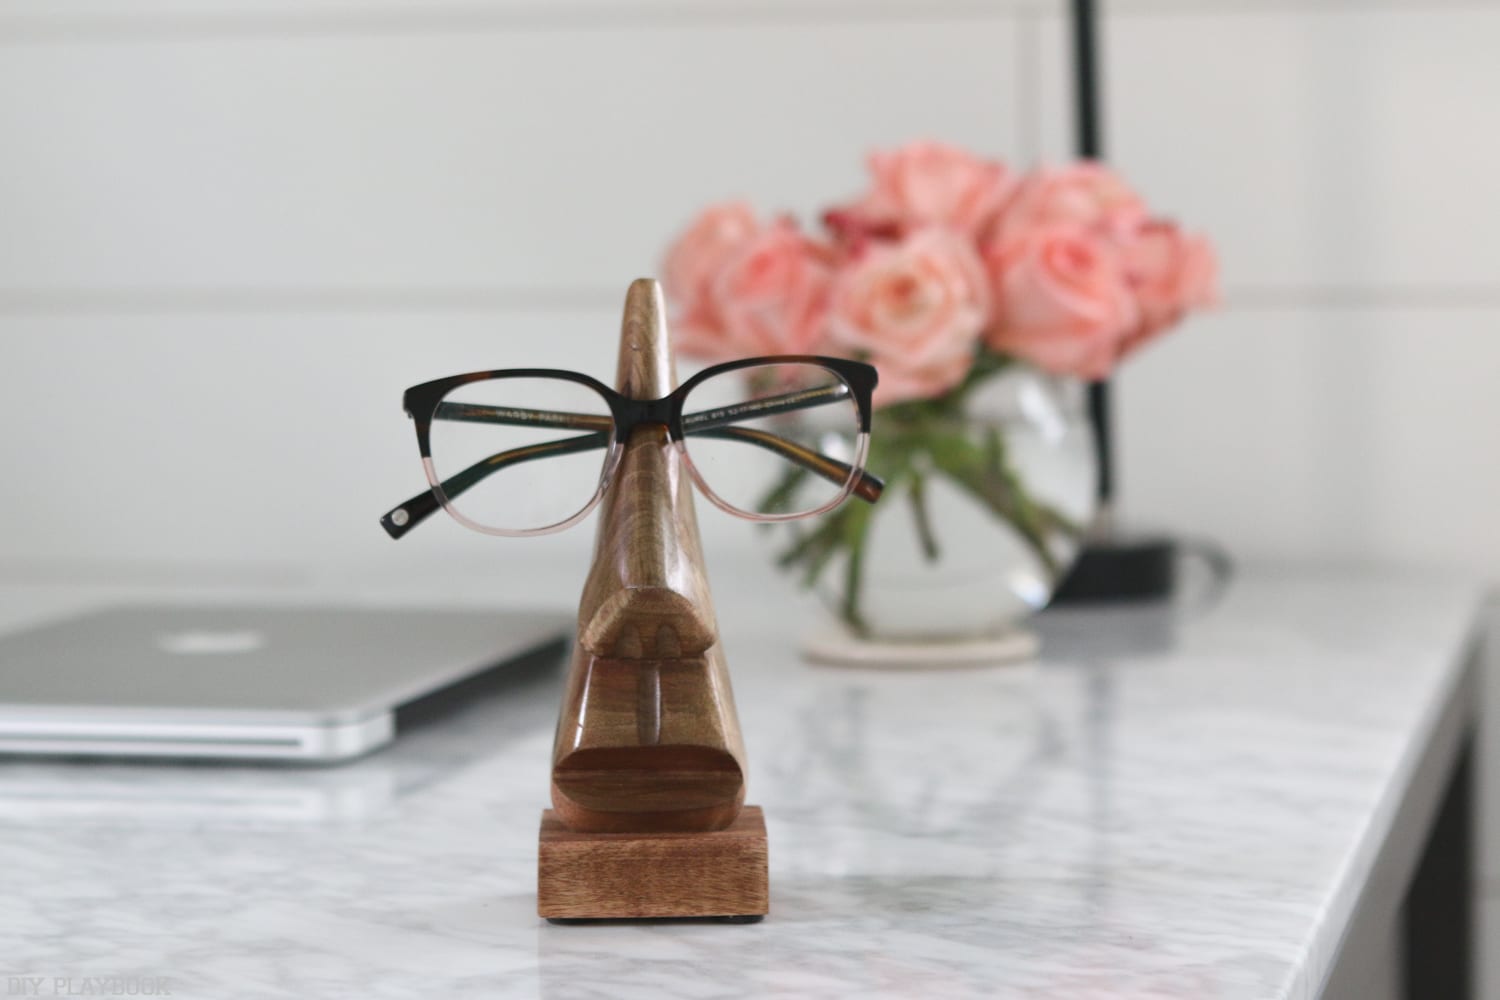 Glasses holder, flowers, and office accessories.